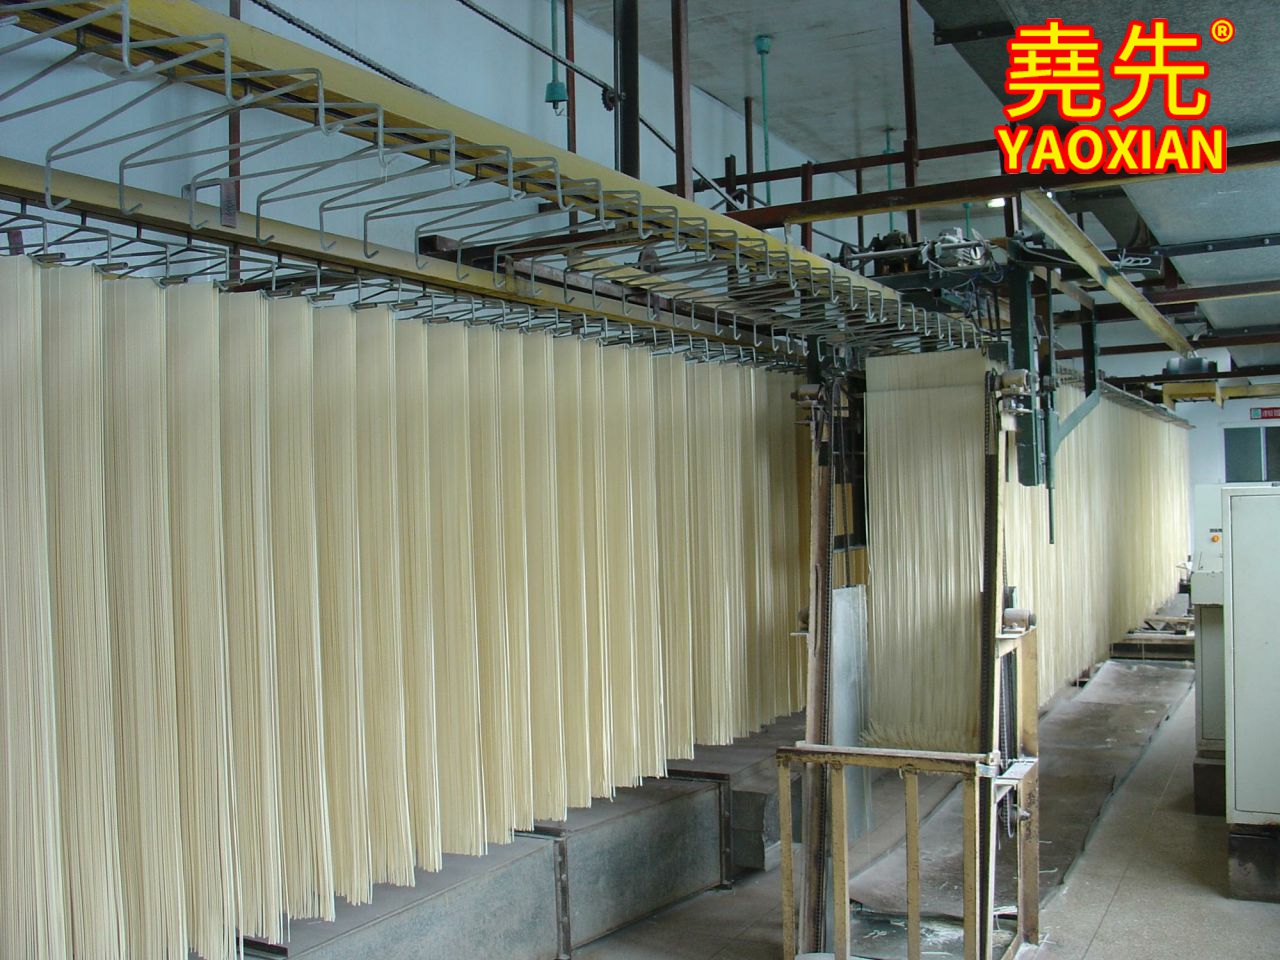 With the mechanized production input, the vermicelli industry improves production and guarantees quality